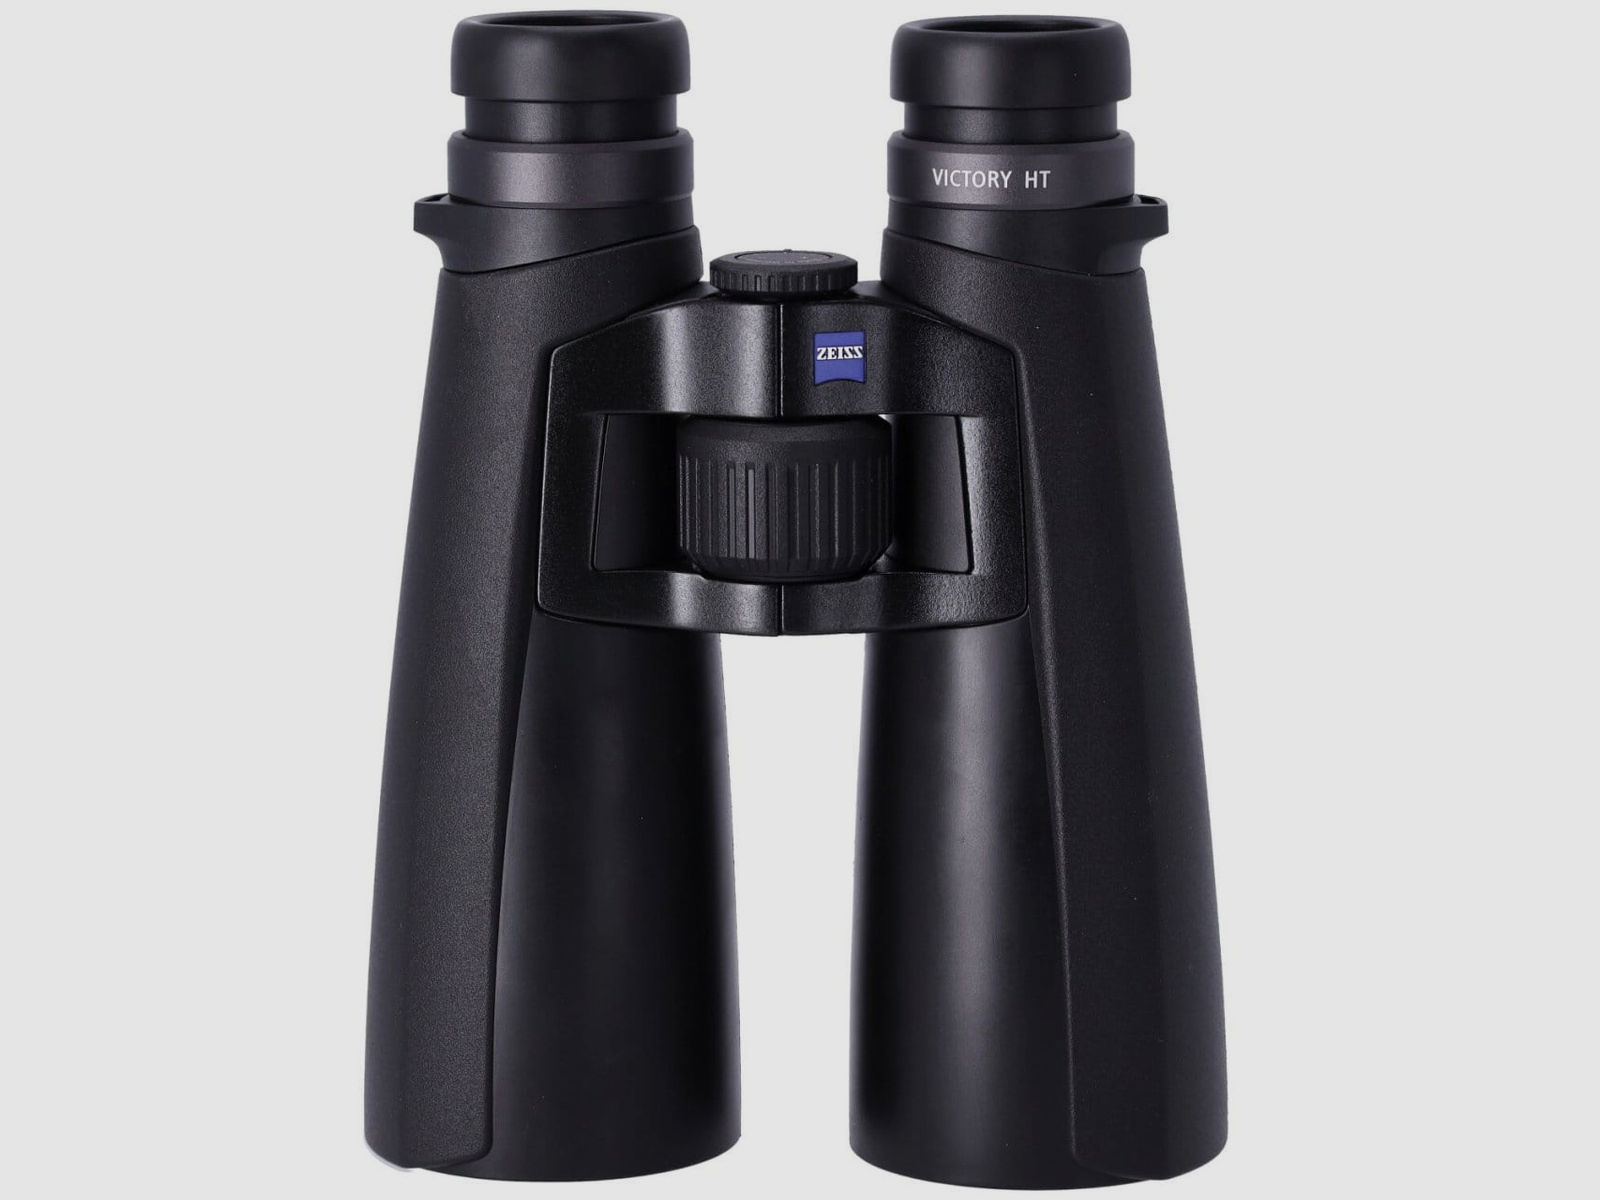 ZEISS VICTORY HT 10x54